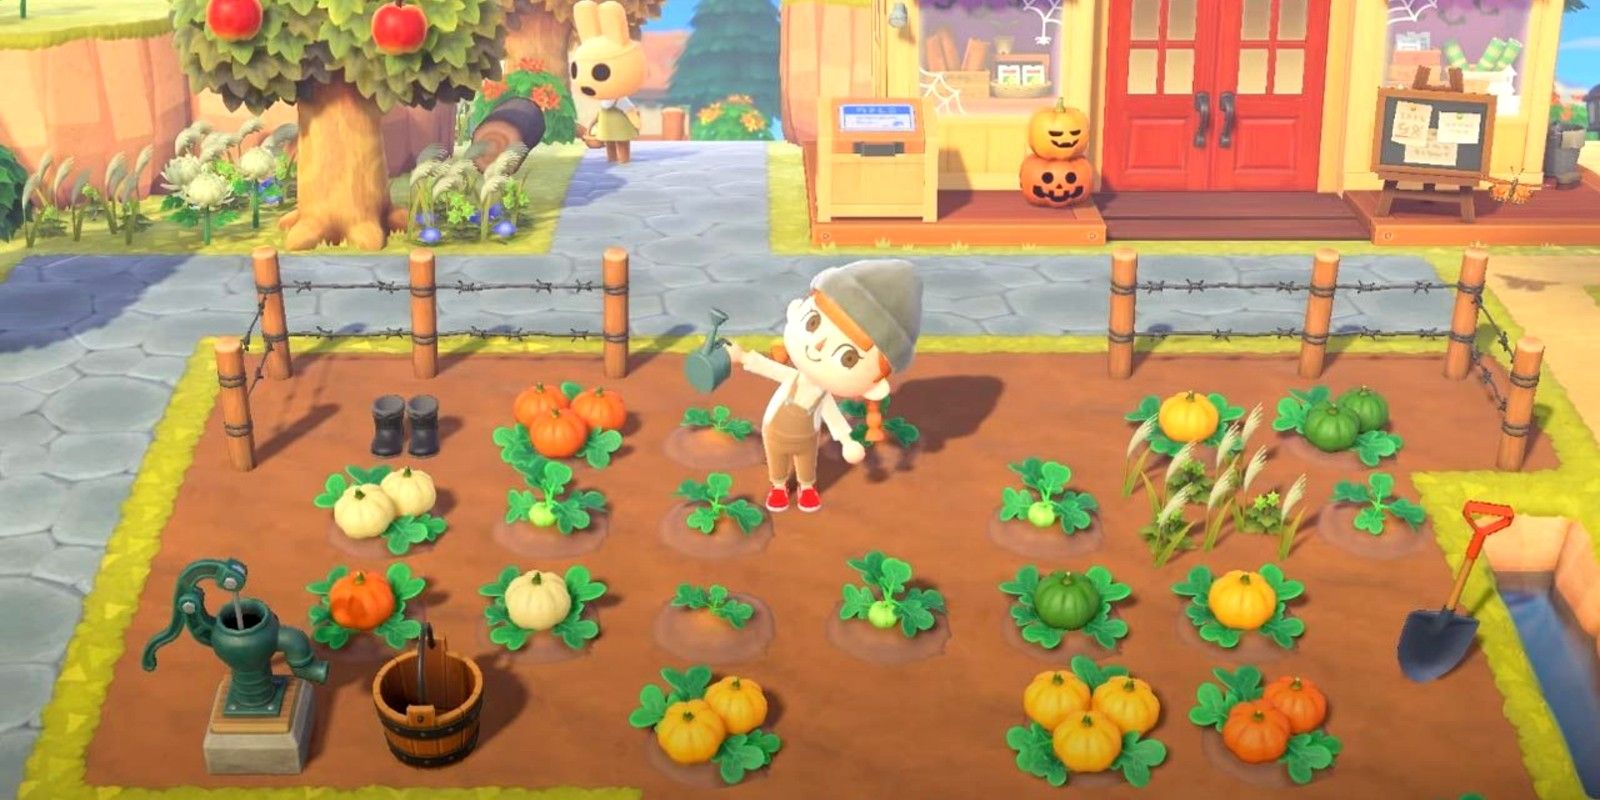 A player farms pumpkins in a pumpkin patch in Animal Crossing: New Horizons